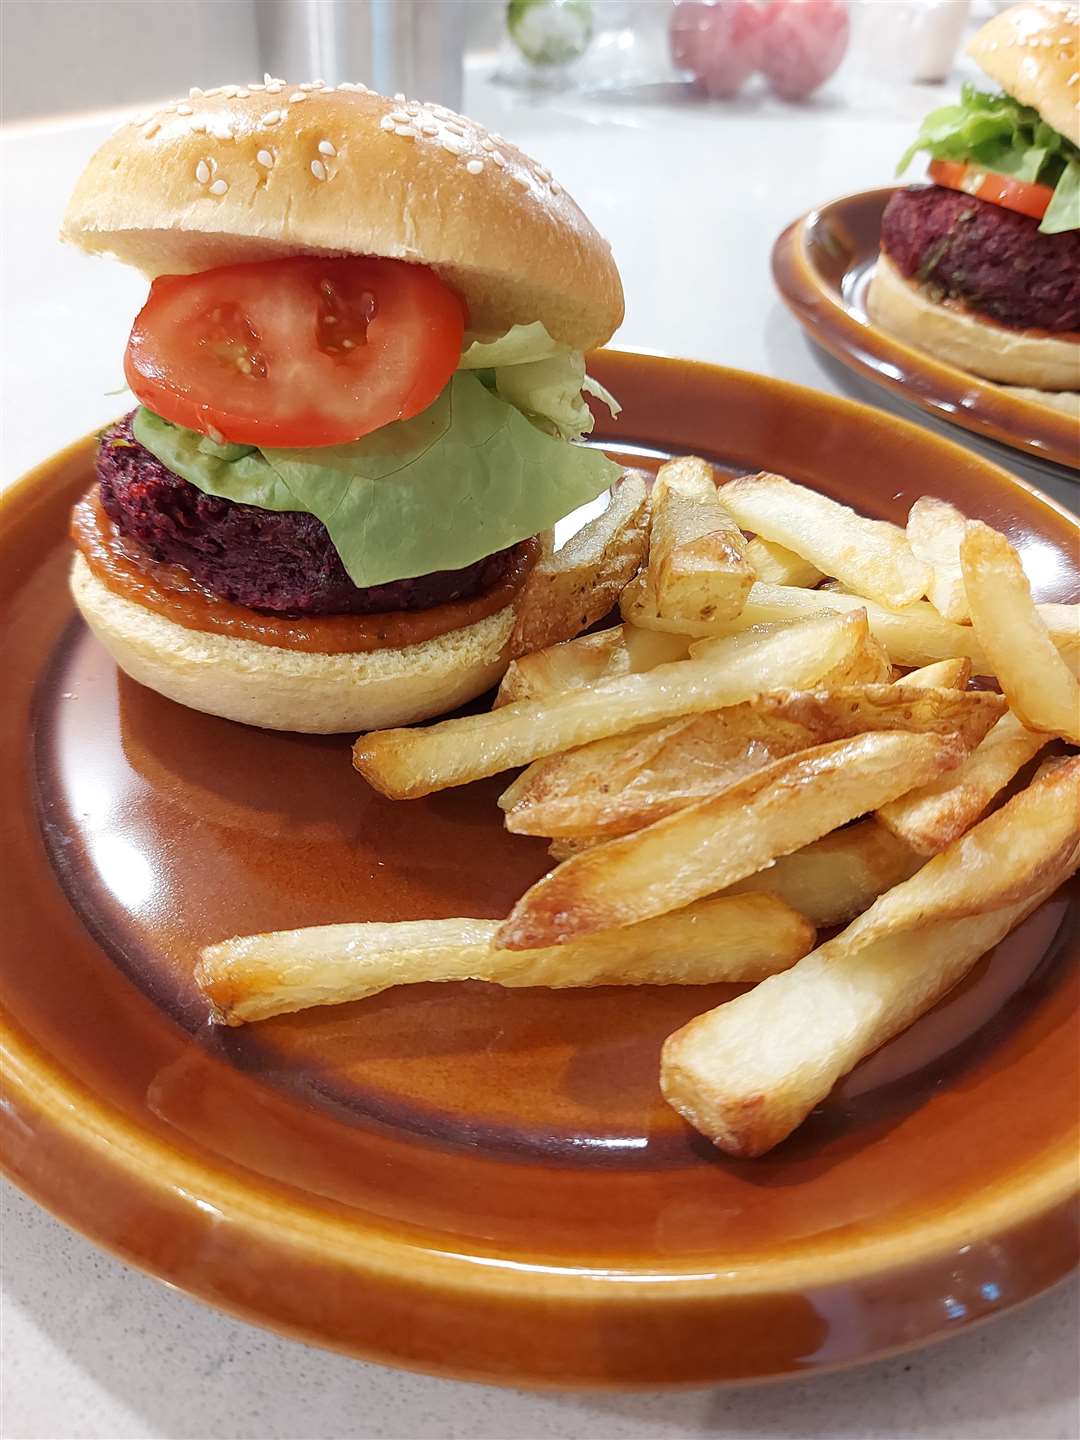 Beetroot burger and chips.